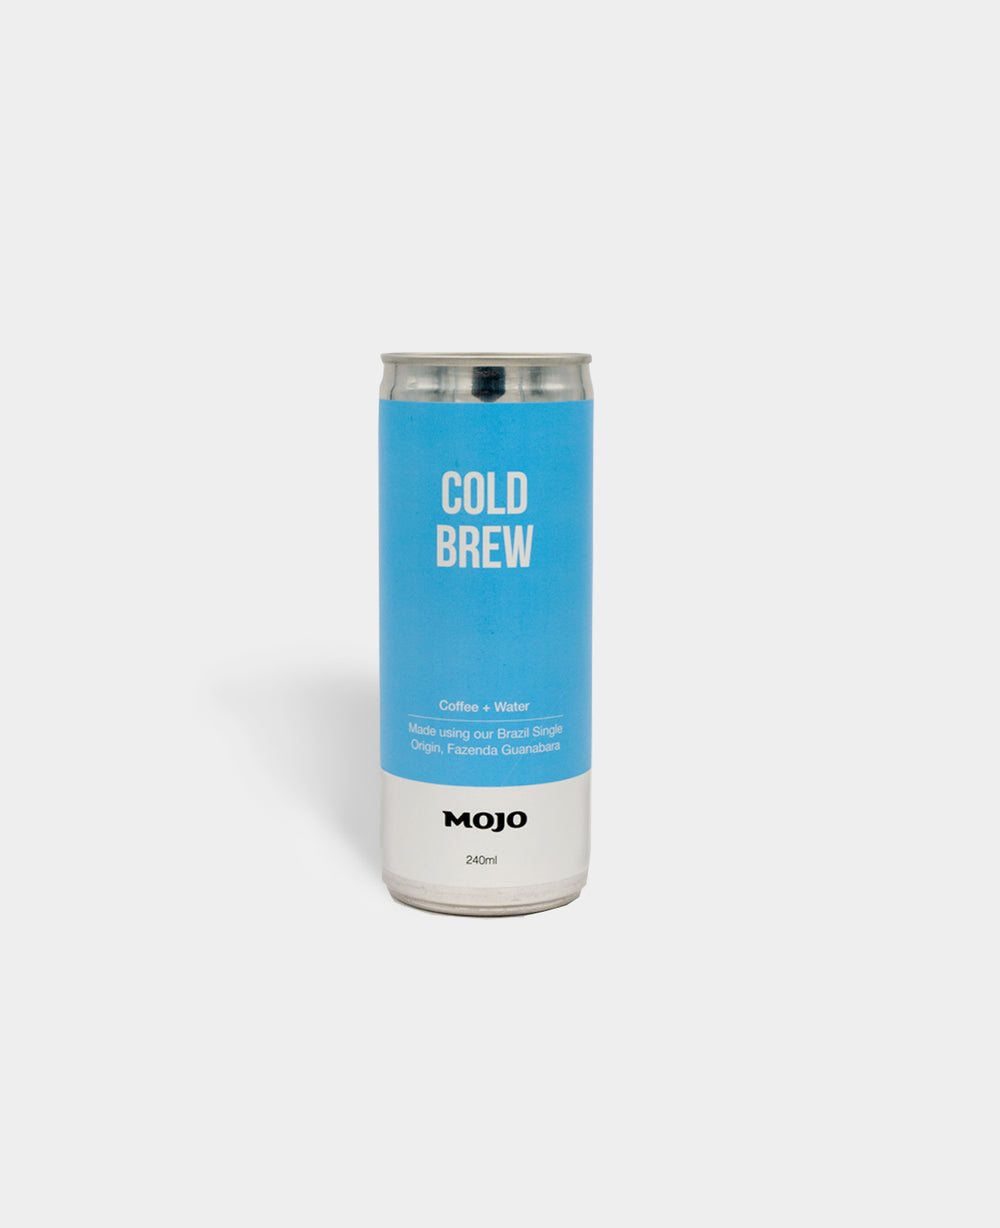 Cold Brew Coffee – Coffee + Water